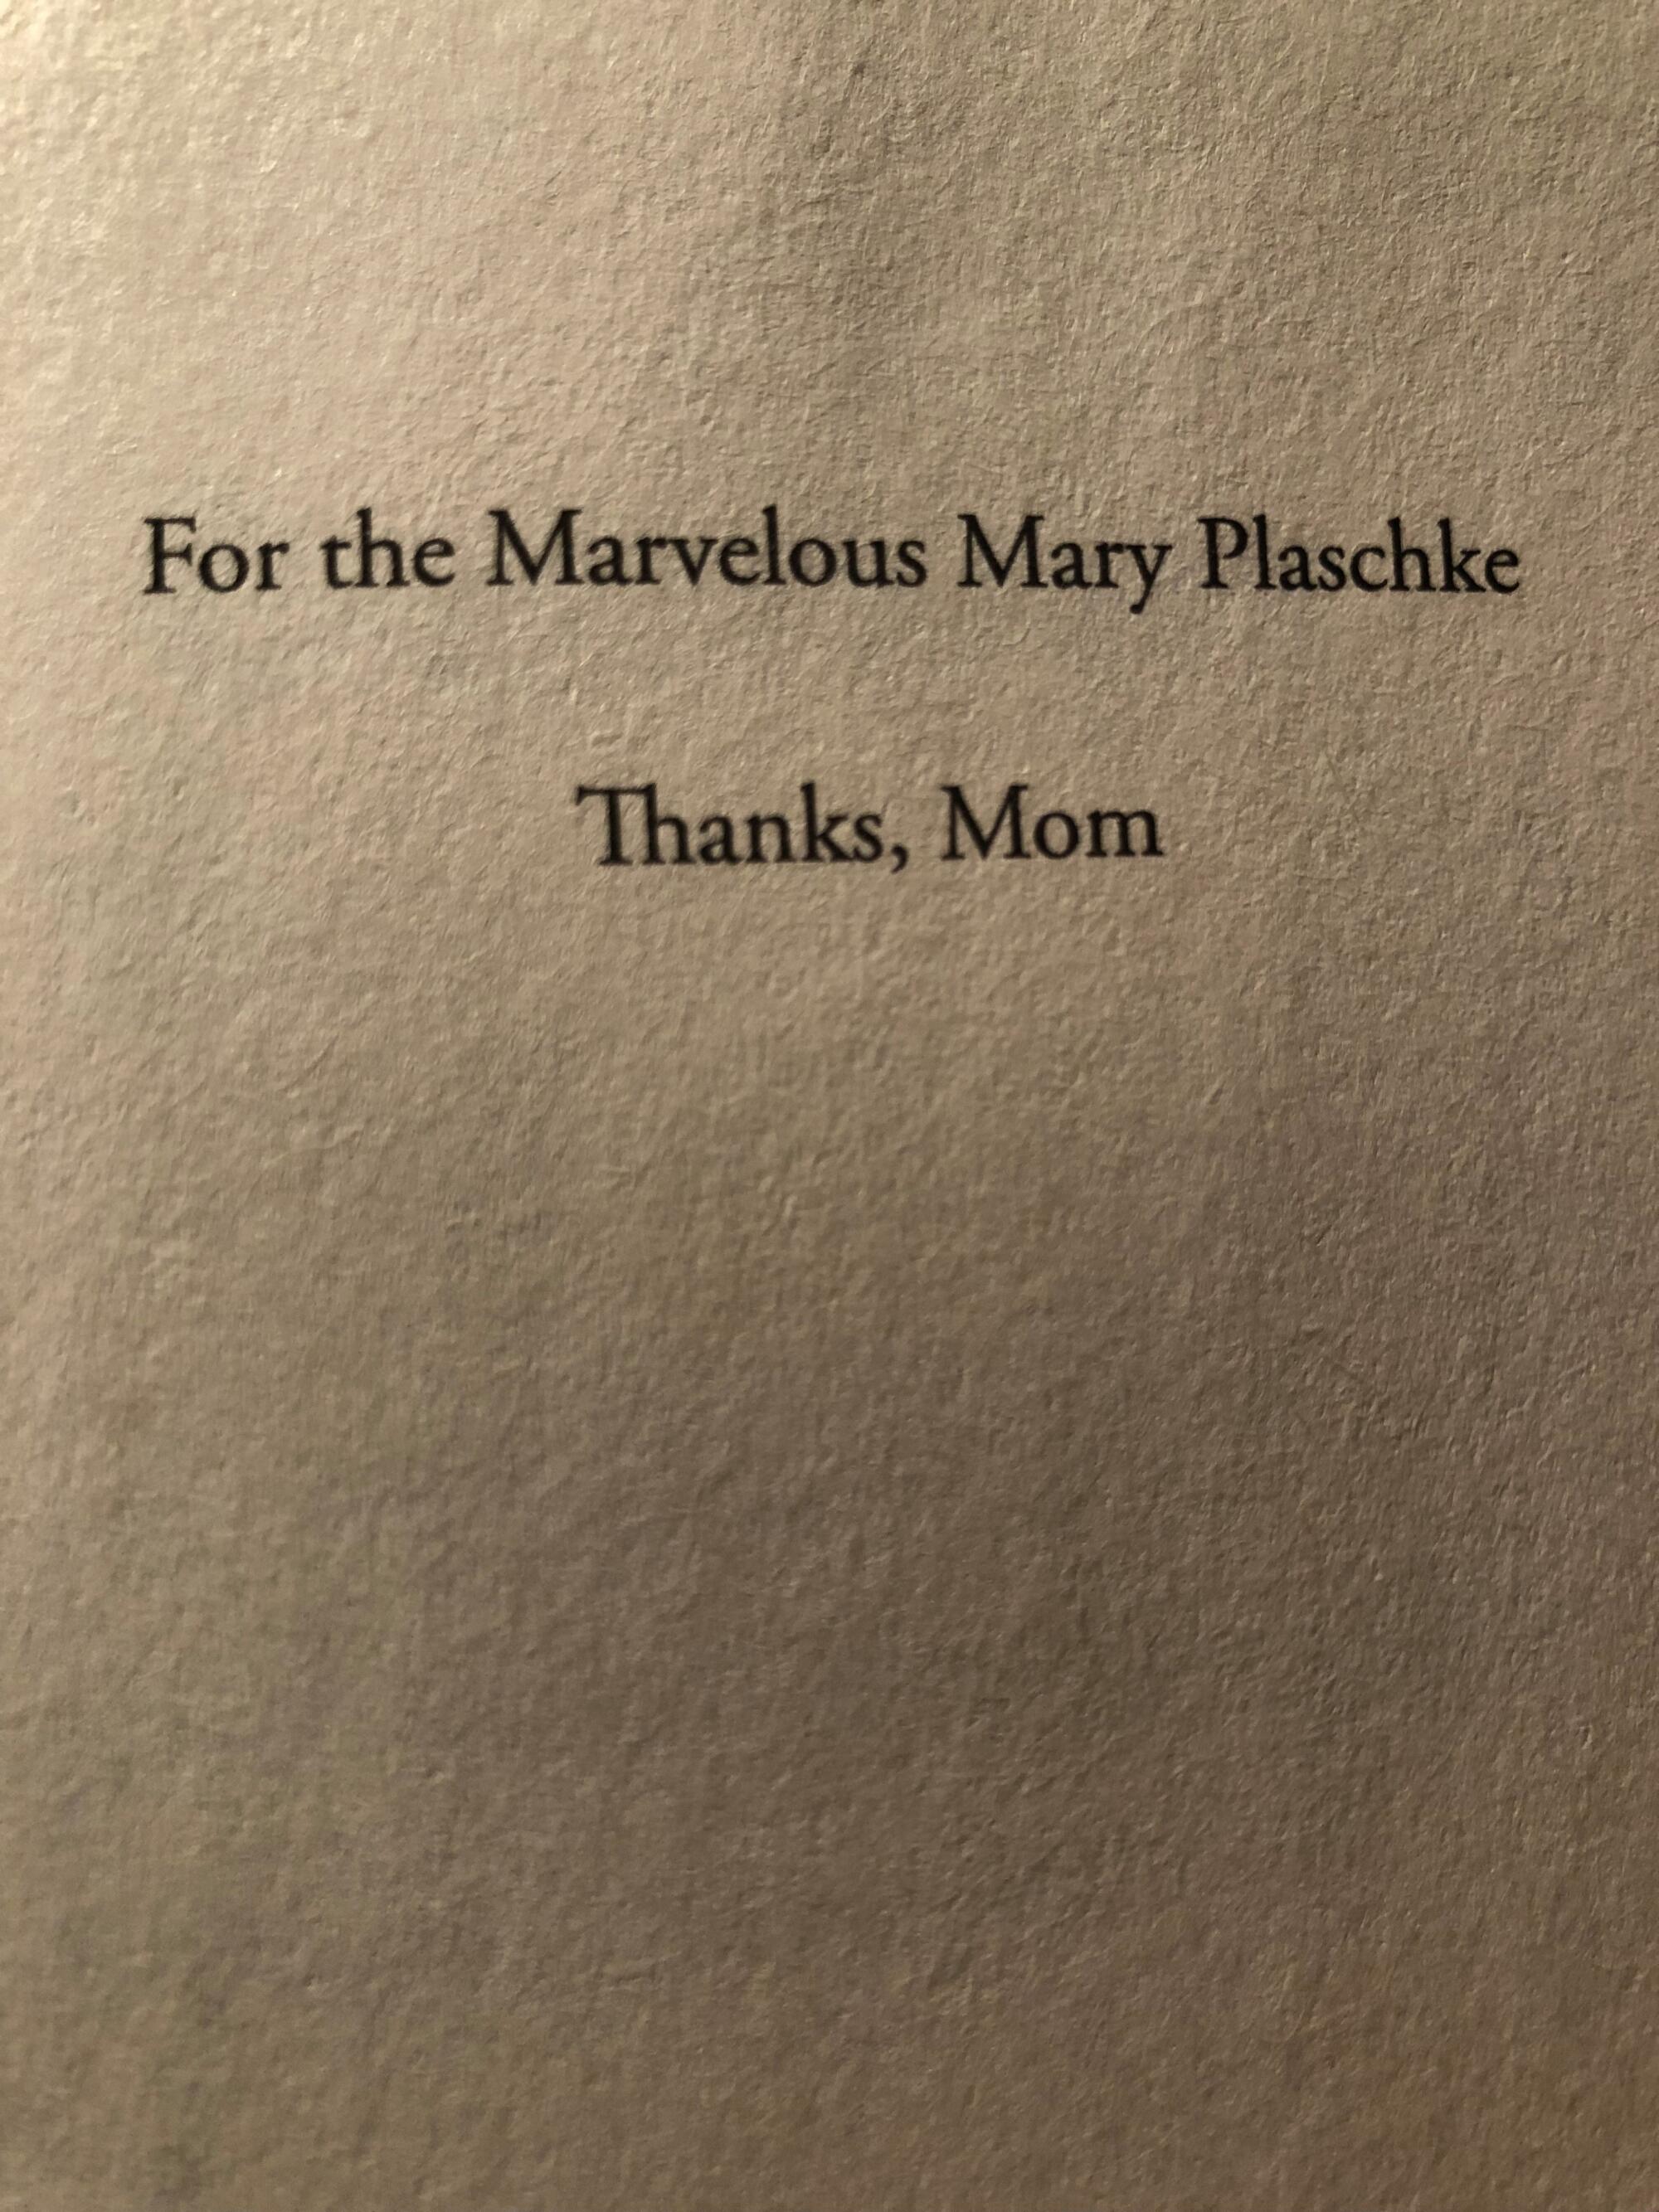 The dedication page to Bill Plaschke's book reads: "For the Marvelous Mary Plaschke. Thanks, mom."